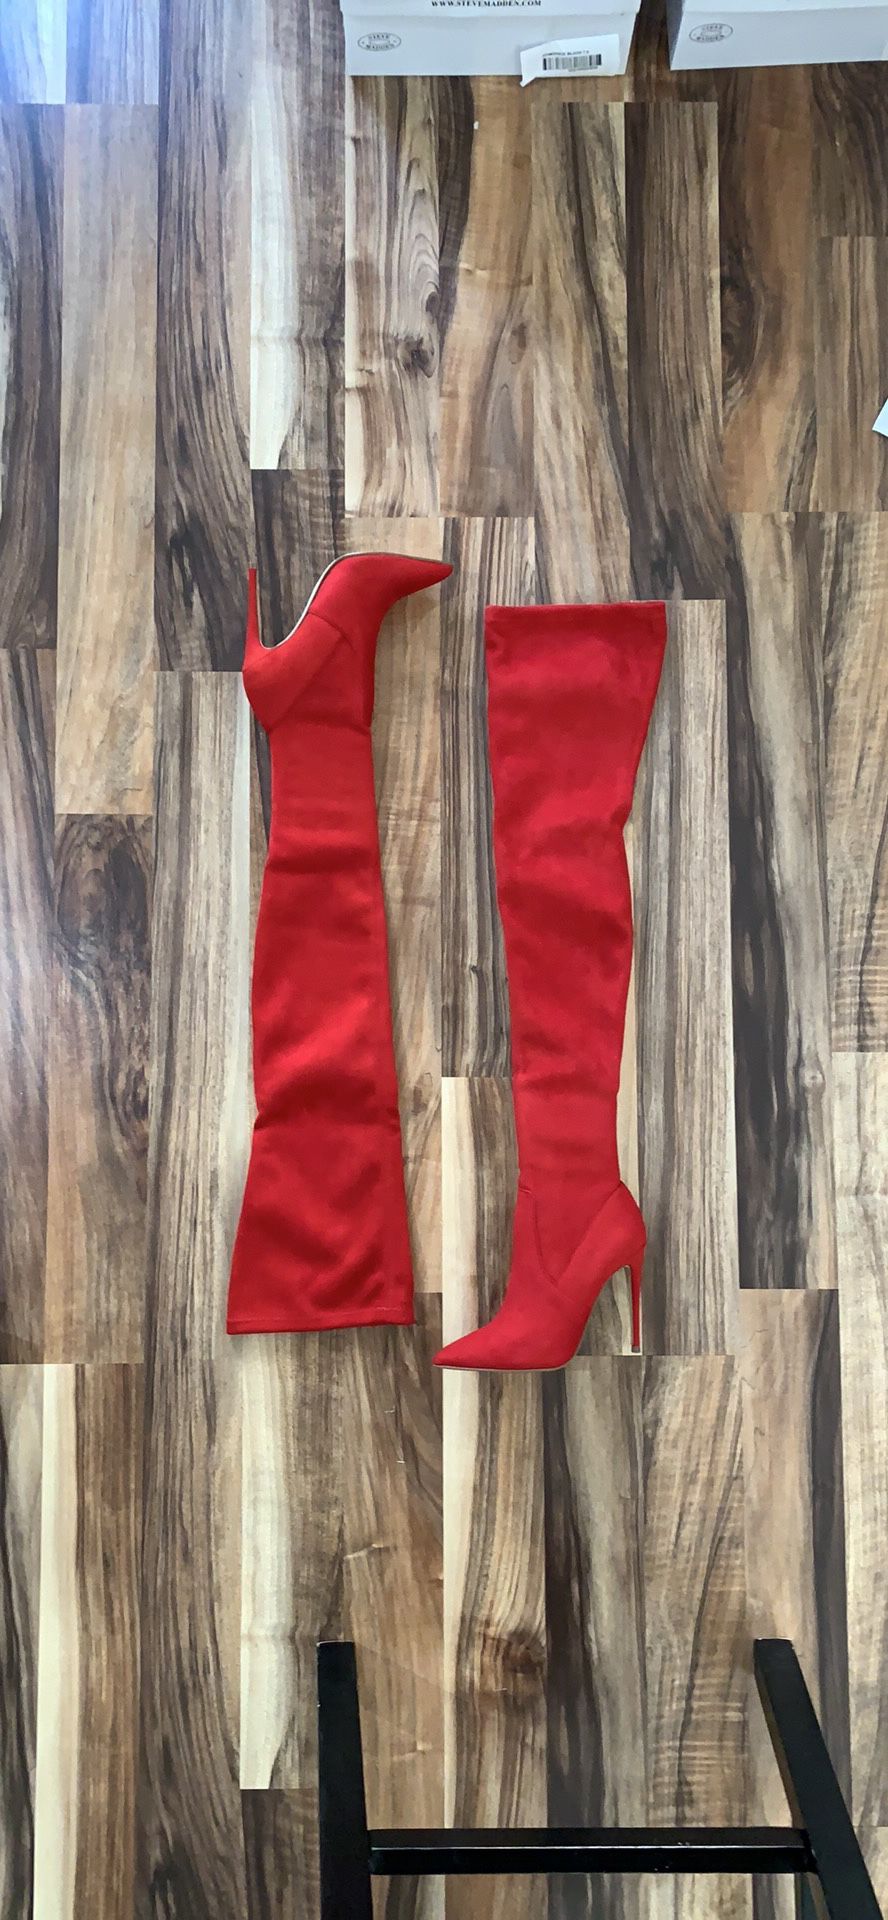 Size 6.0 NEW Steve Madden Dominique Thigh High Boots